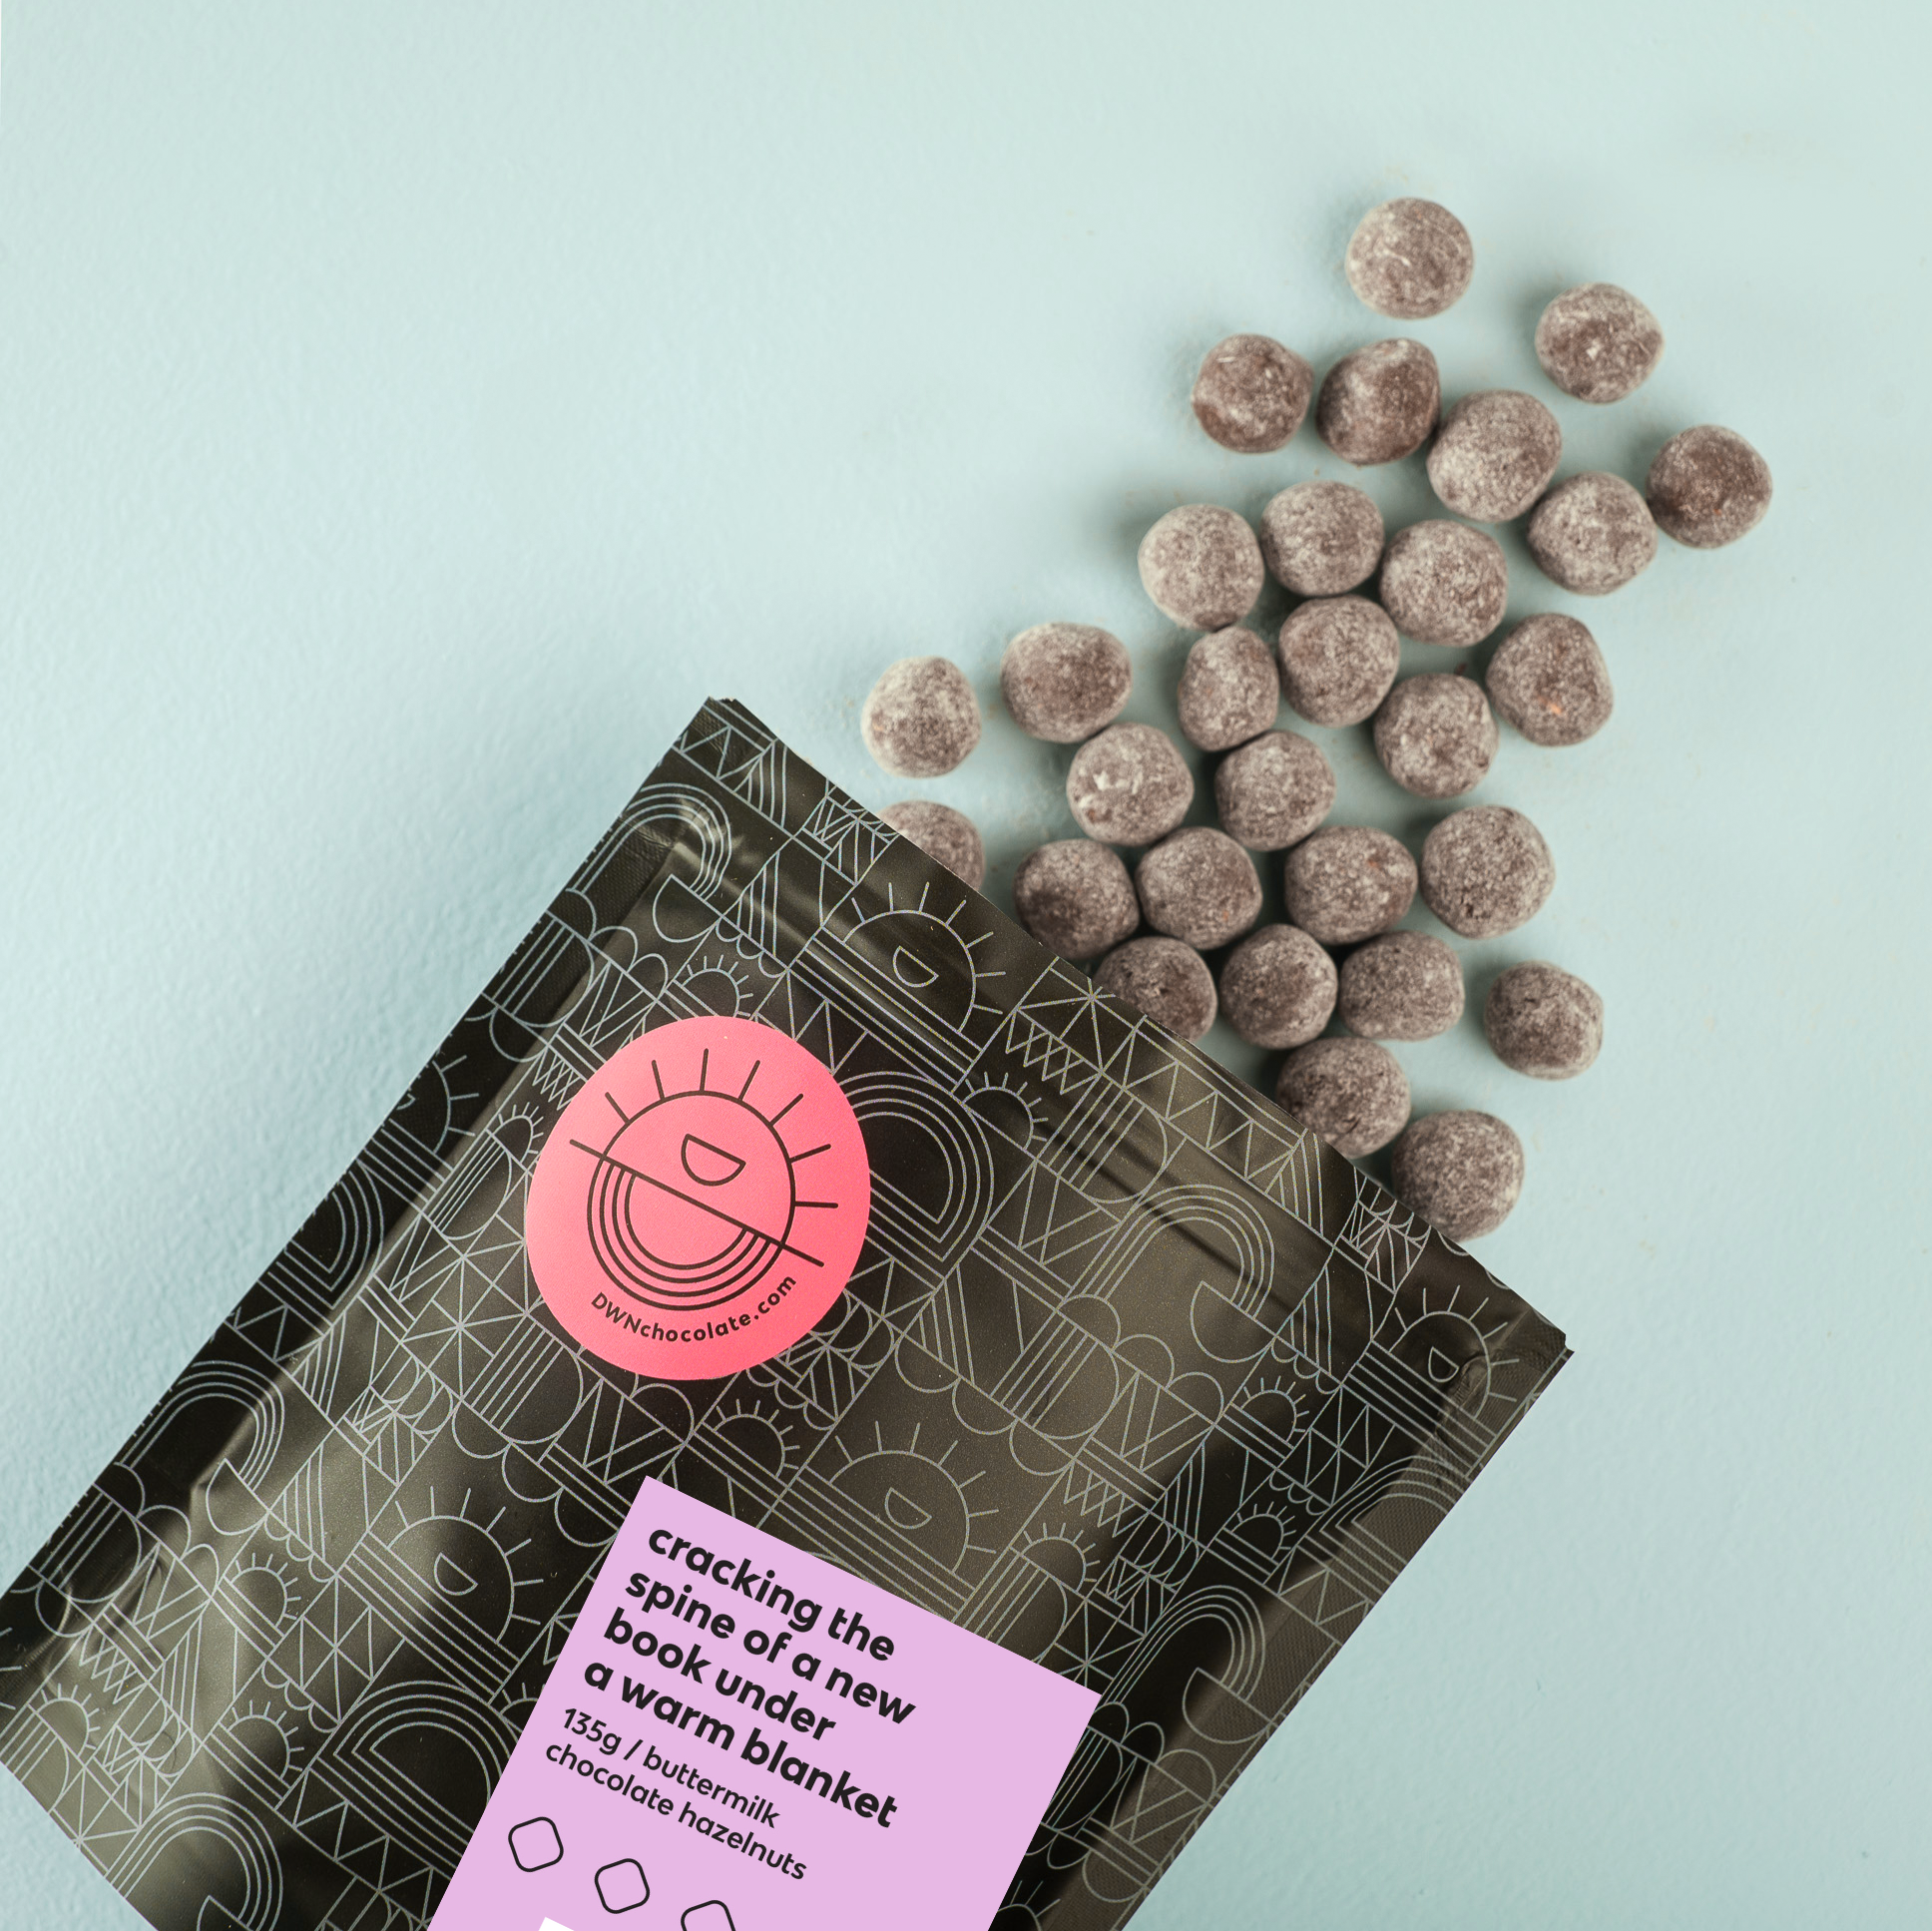 buttermilk hazelnut thumbles in their package